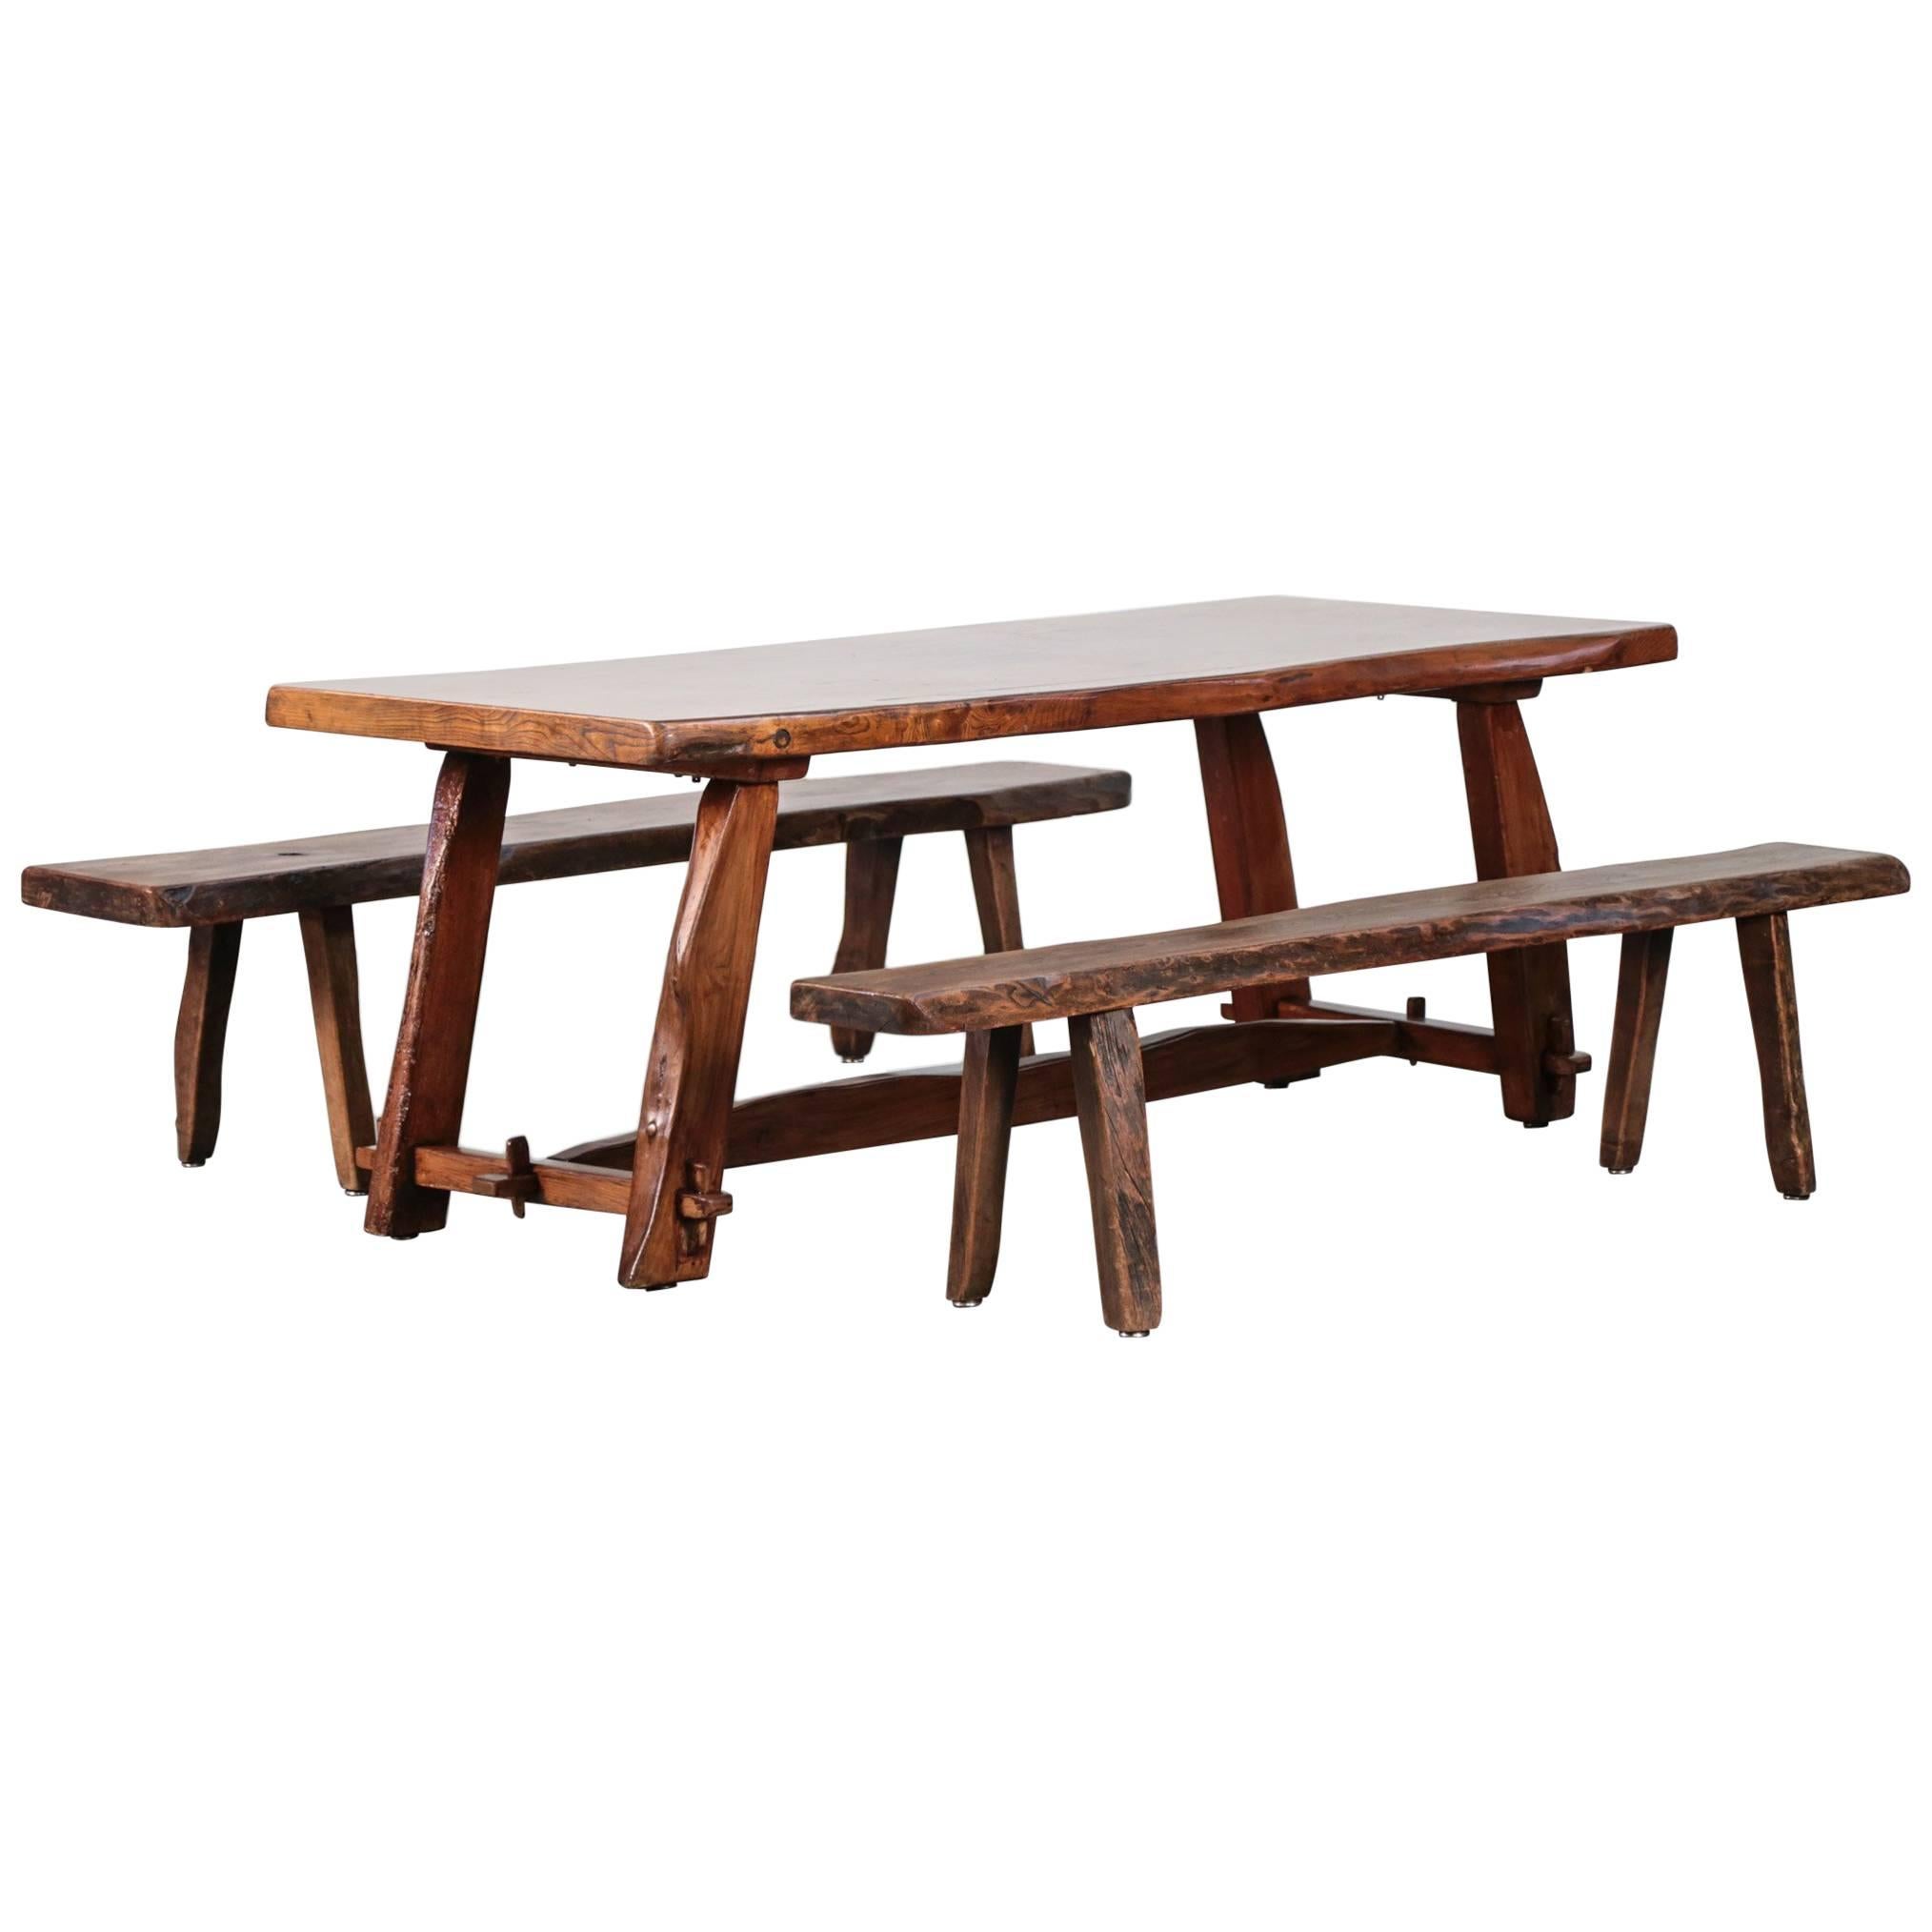 Olavi Hanninen Dining Room Set, Table and Benches